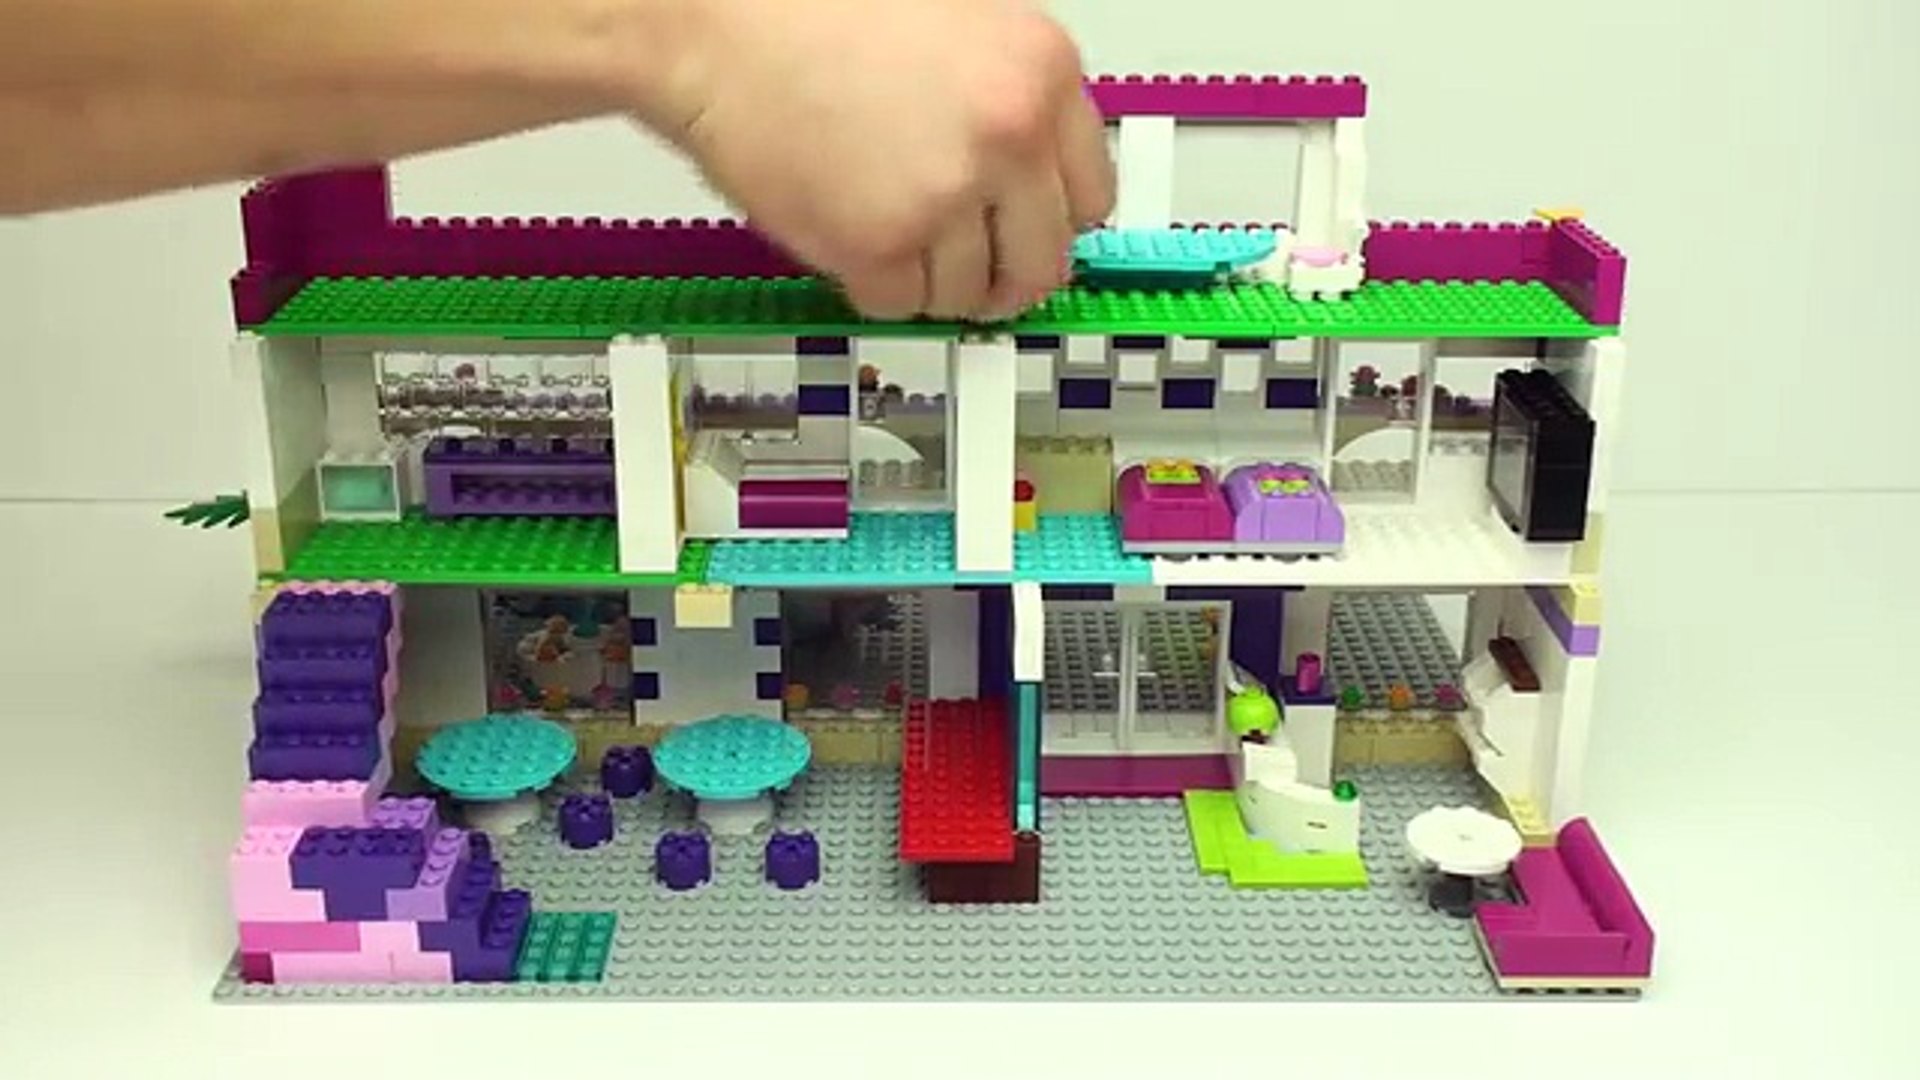 Lego Friends Heartlake Grand Hotel Build Review Part 2 By Misty Brick Video Dailymotion